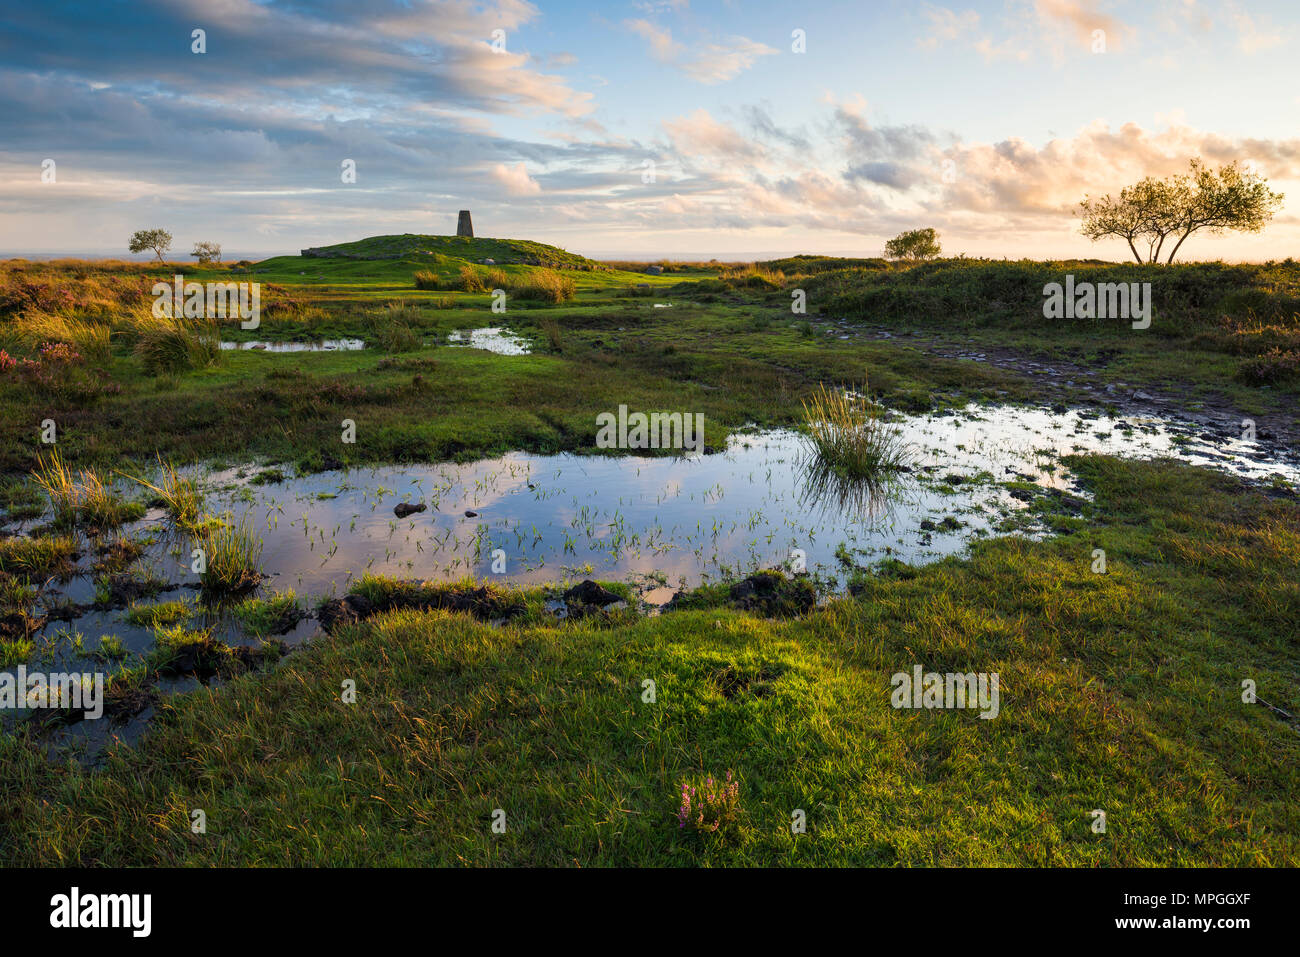 The trig point at Beacon Batch on Black Down in the Mendip Hills Area of Outstanding Natural Beauty, Somerset, England. Stock Photo